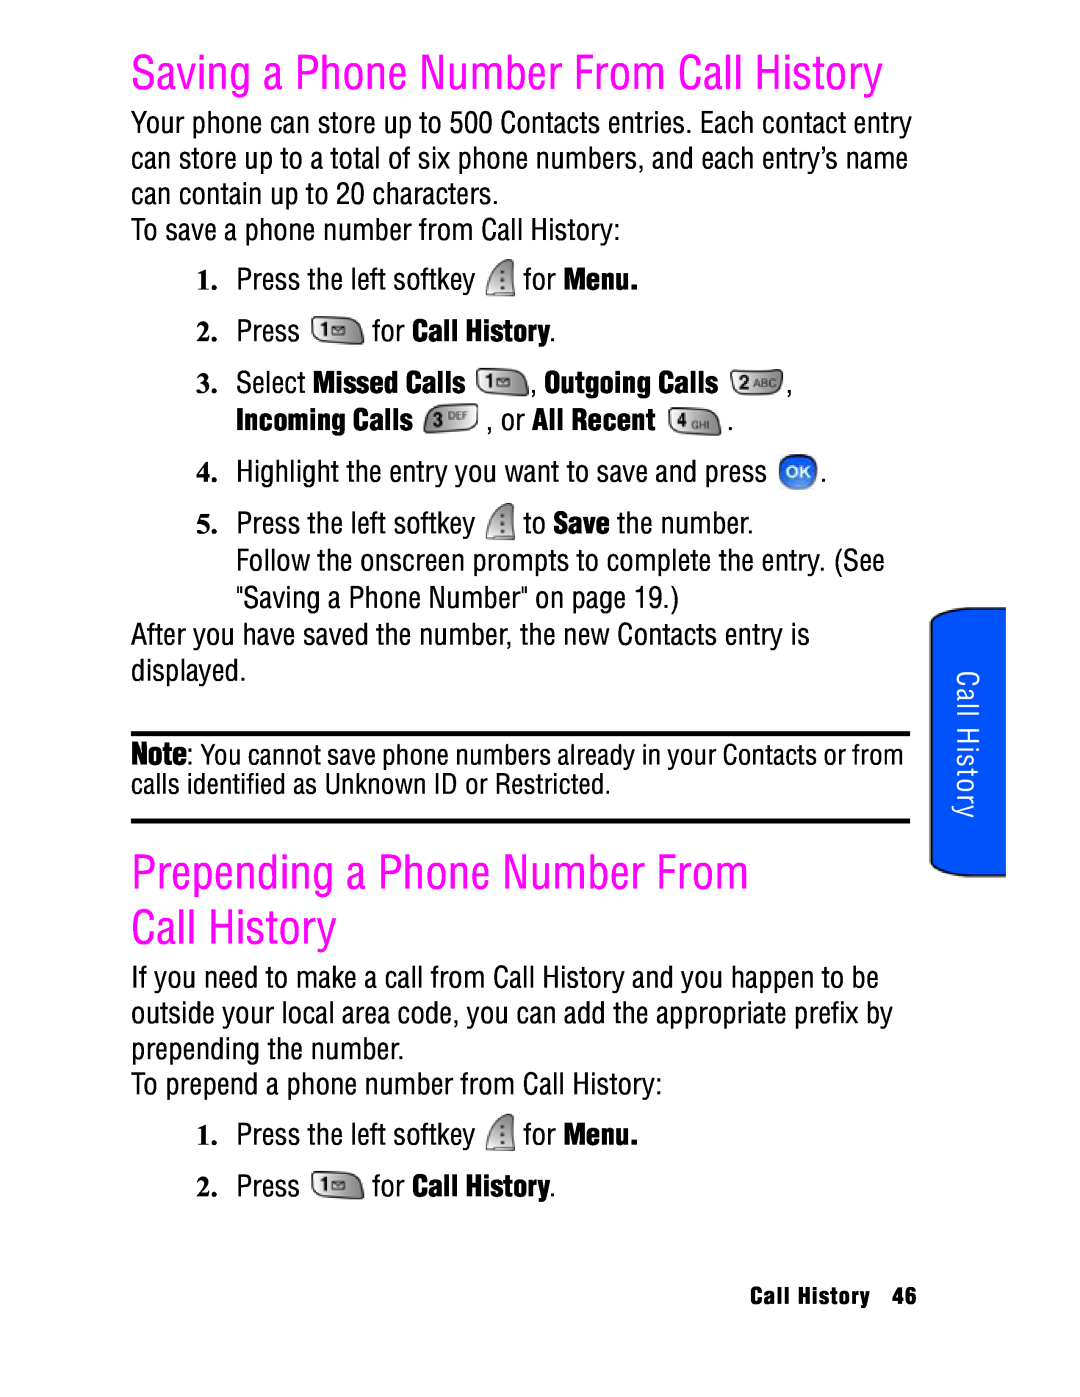 Samsung SPH-a740 manual Prepending a Phone Number From Call History, Select Missed Calls , Outgoing Calls 